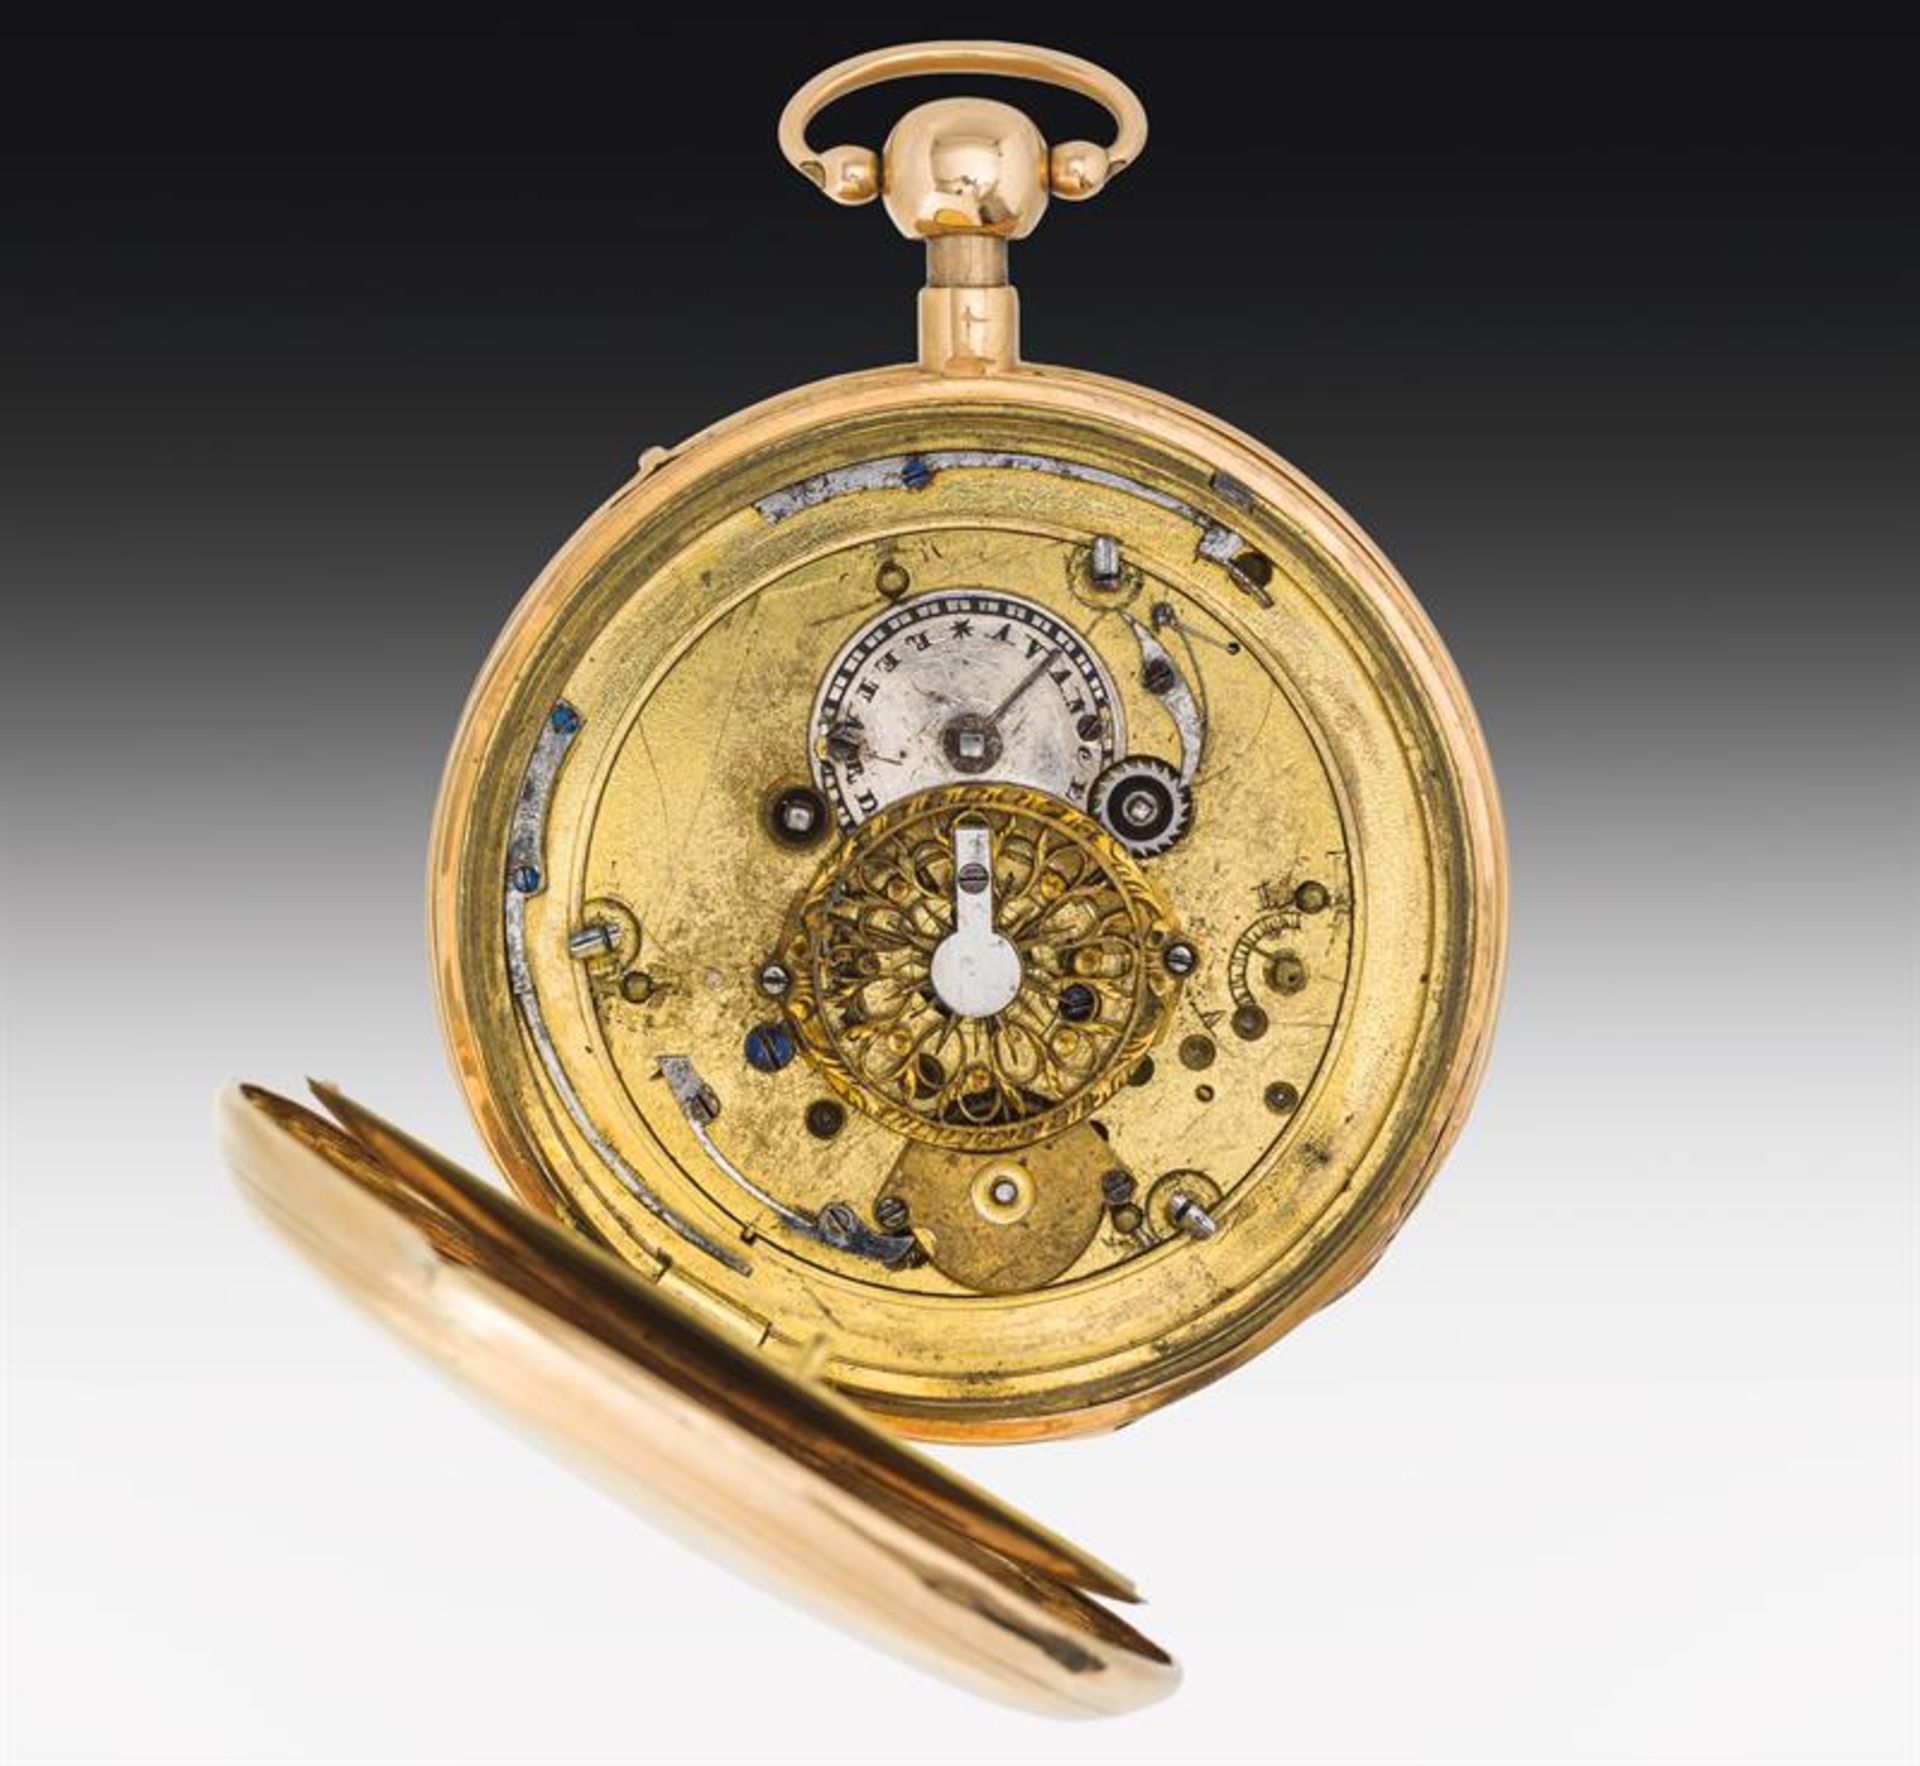 Golden pocket watch with automatic and chiming mechanism - Image 2 of 2